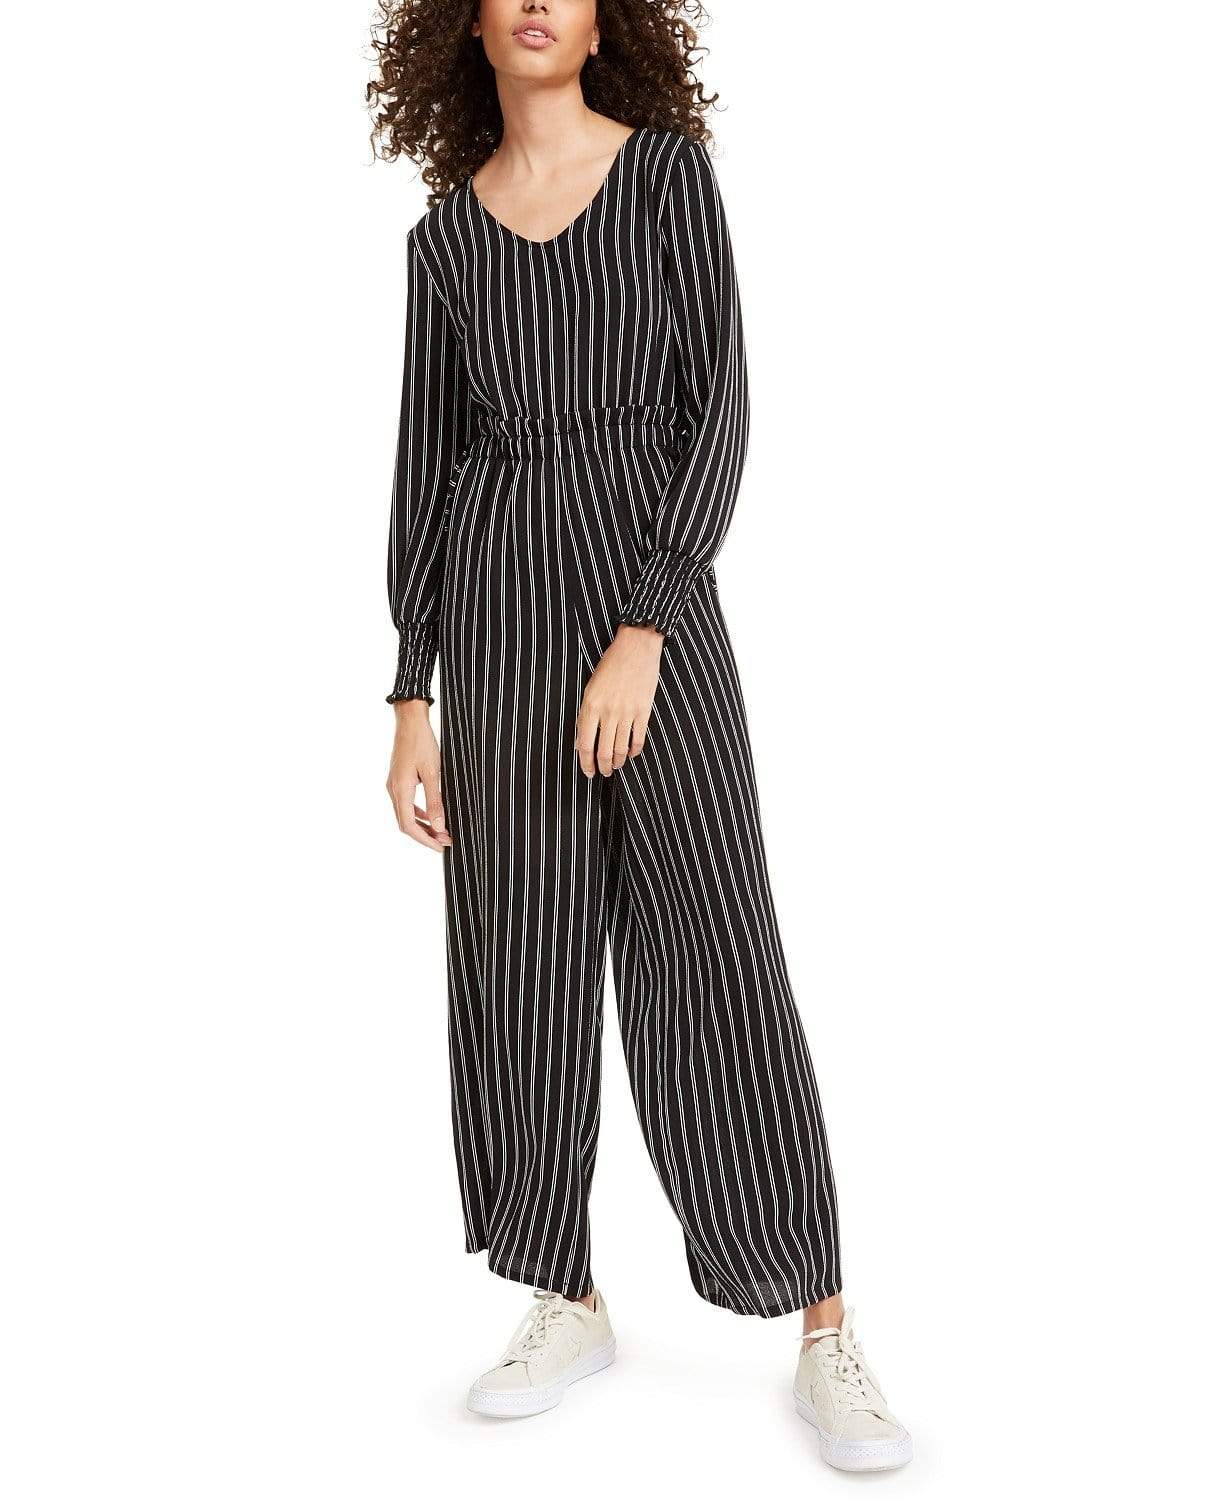 Brands and Beyond Womens Bottoms Black- white / X-Large Striped Paper-bag Jumpsuit